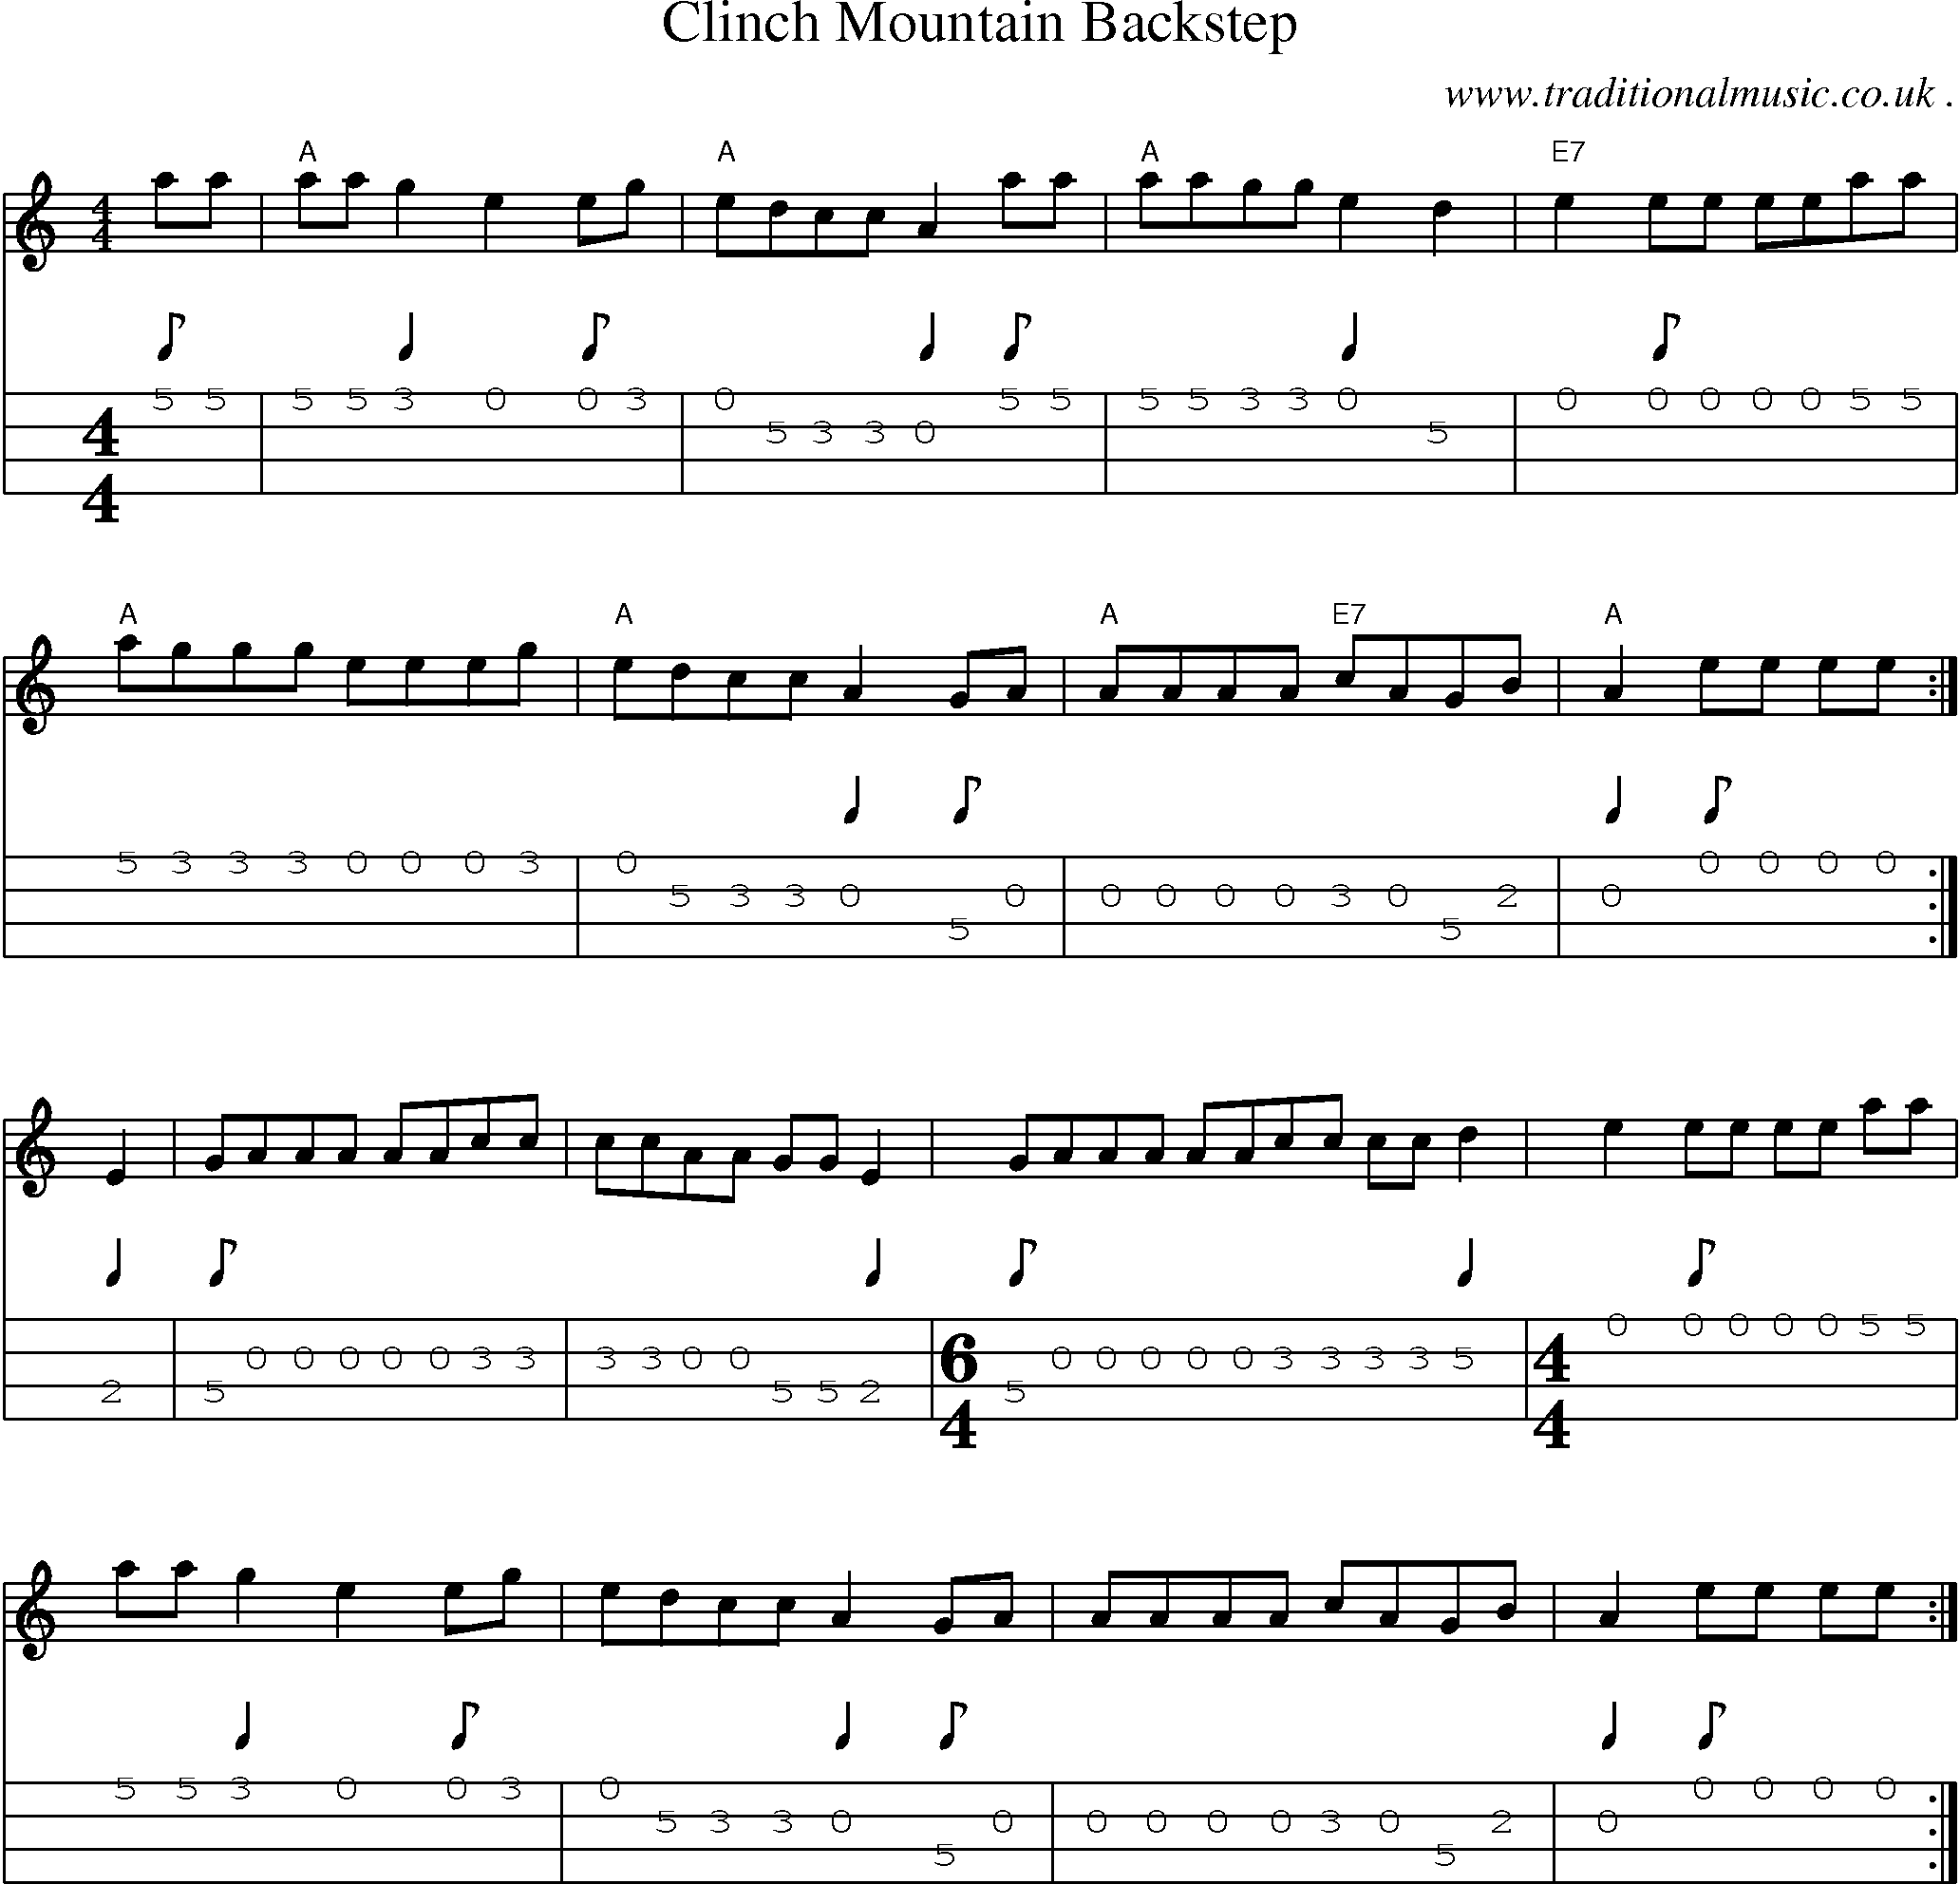 Music Score and Guitar Tabs for Clinch Mountain Backstep